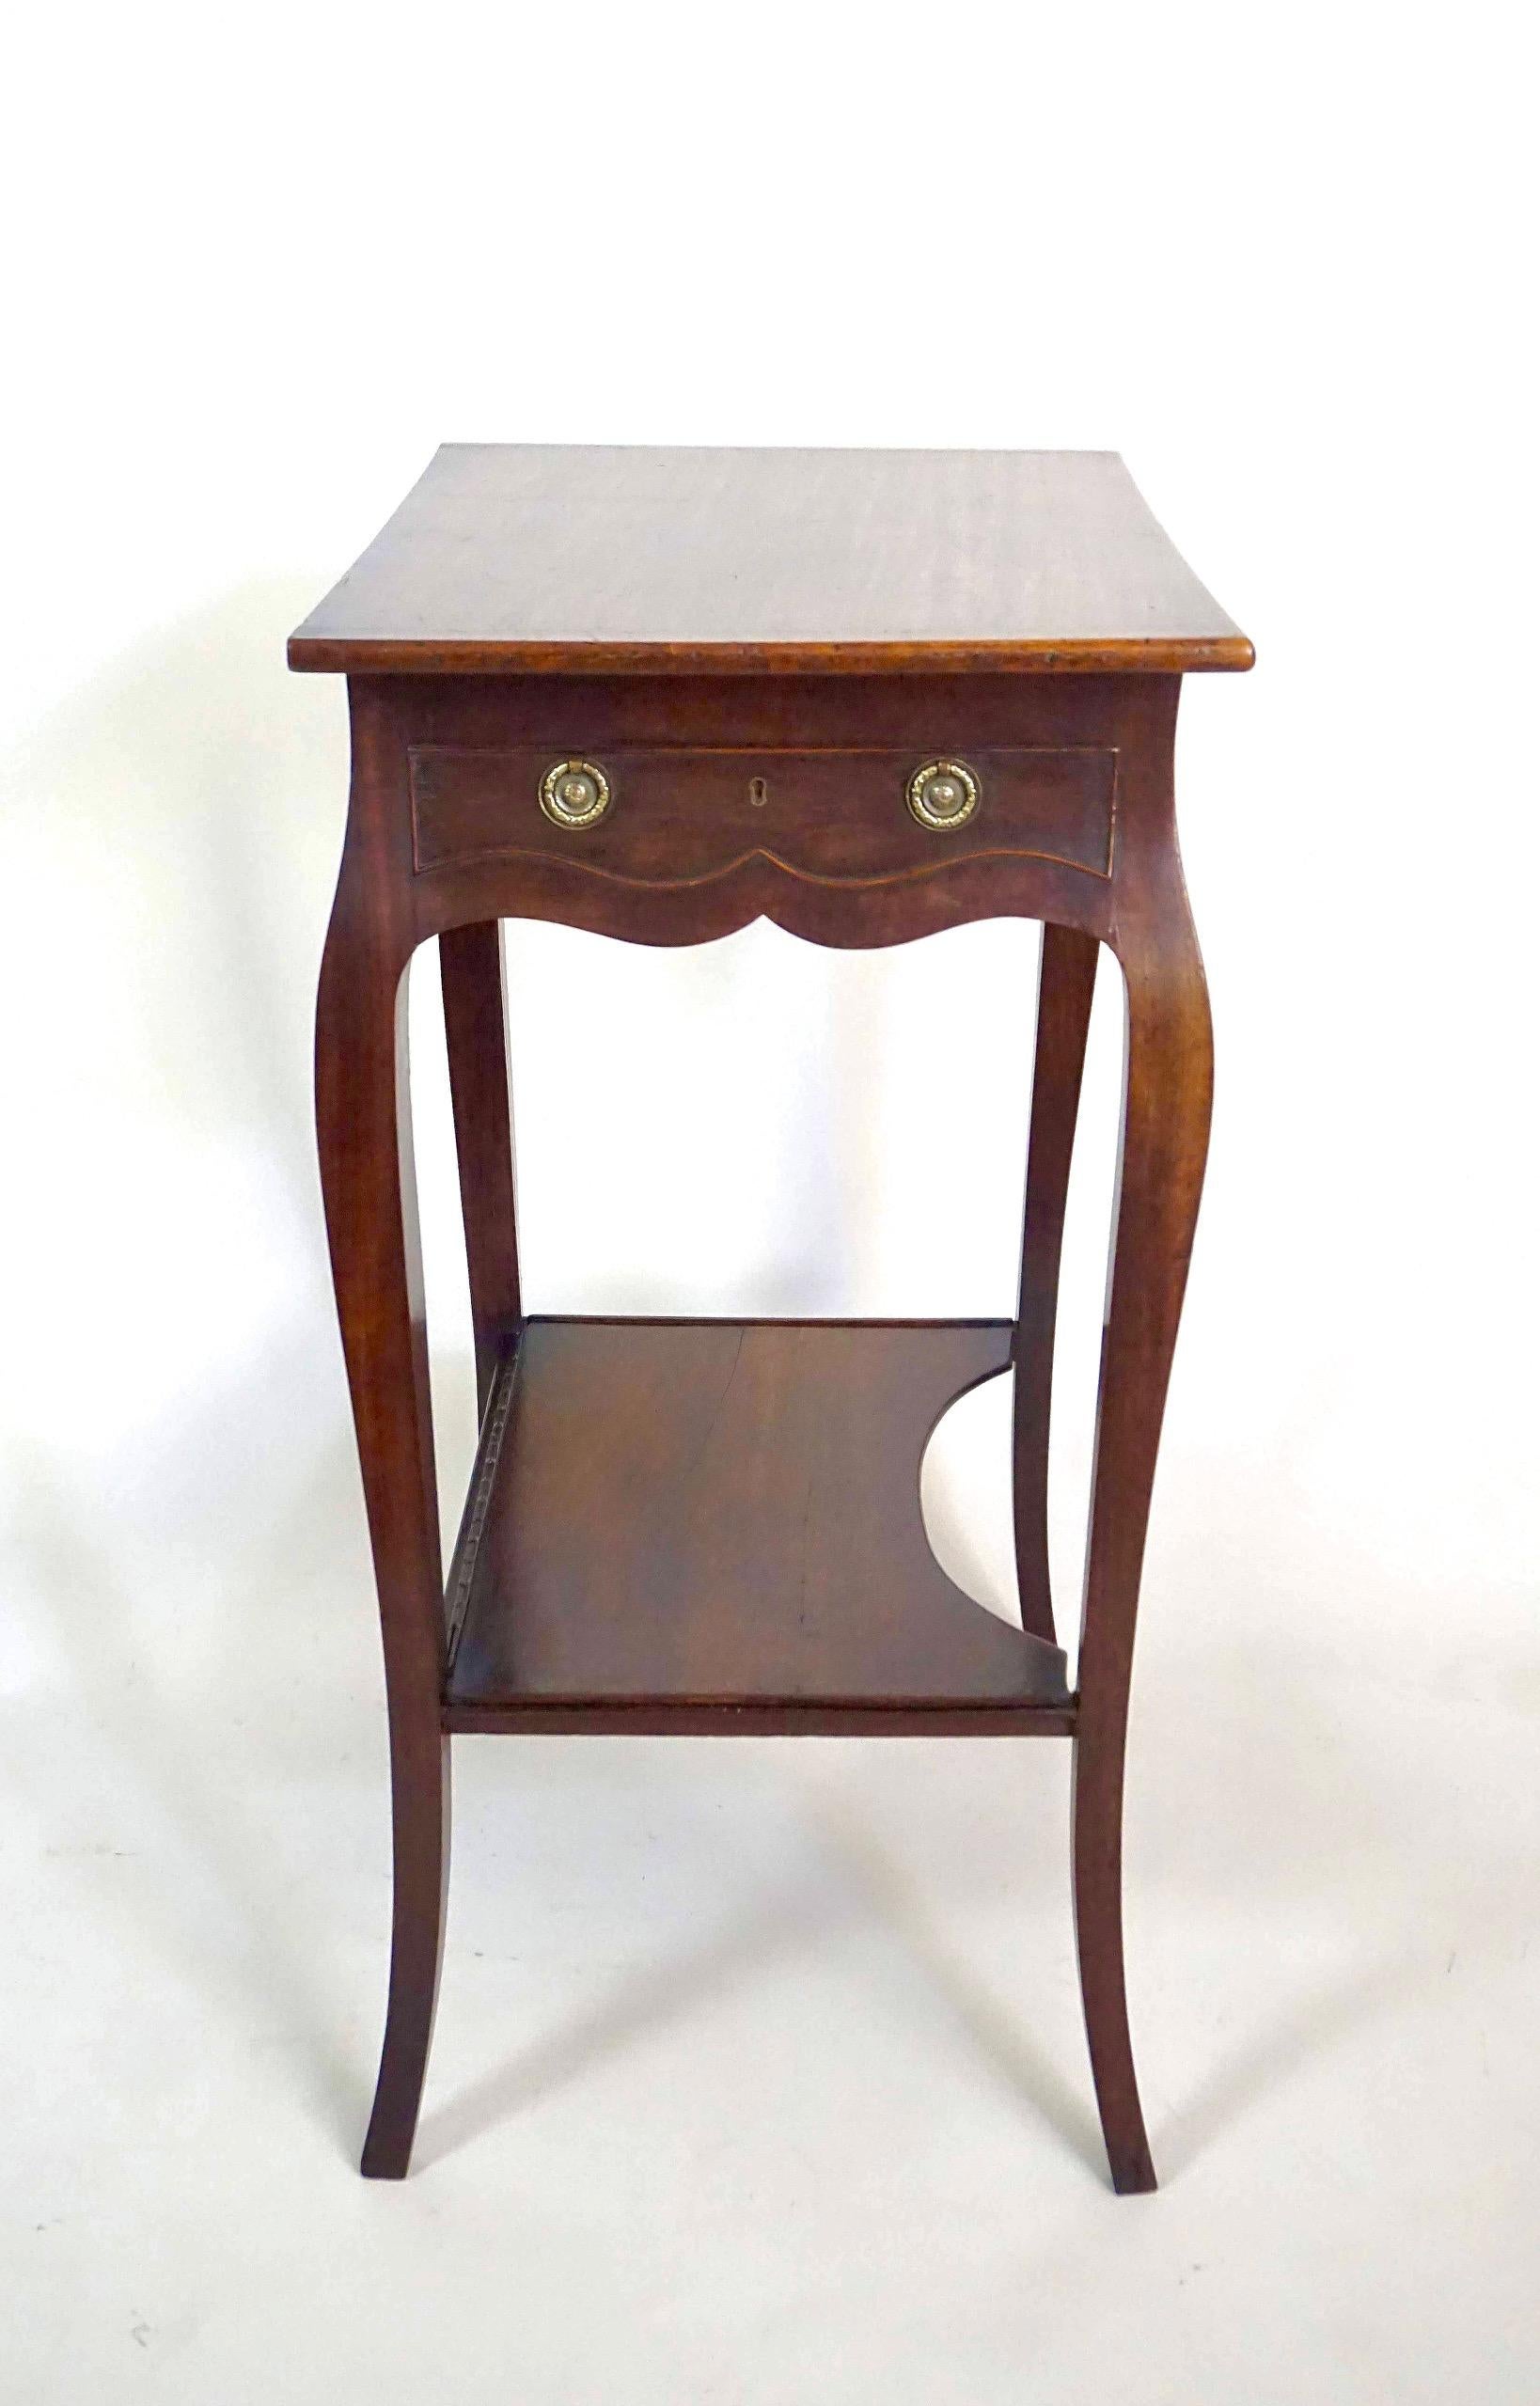 English George III Sabicu & Gonçalo Alves Work Table in the Manner of John Cobb For Sale 3